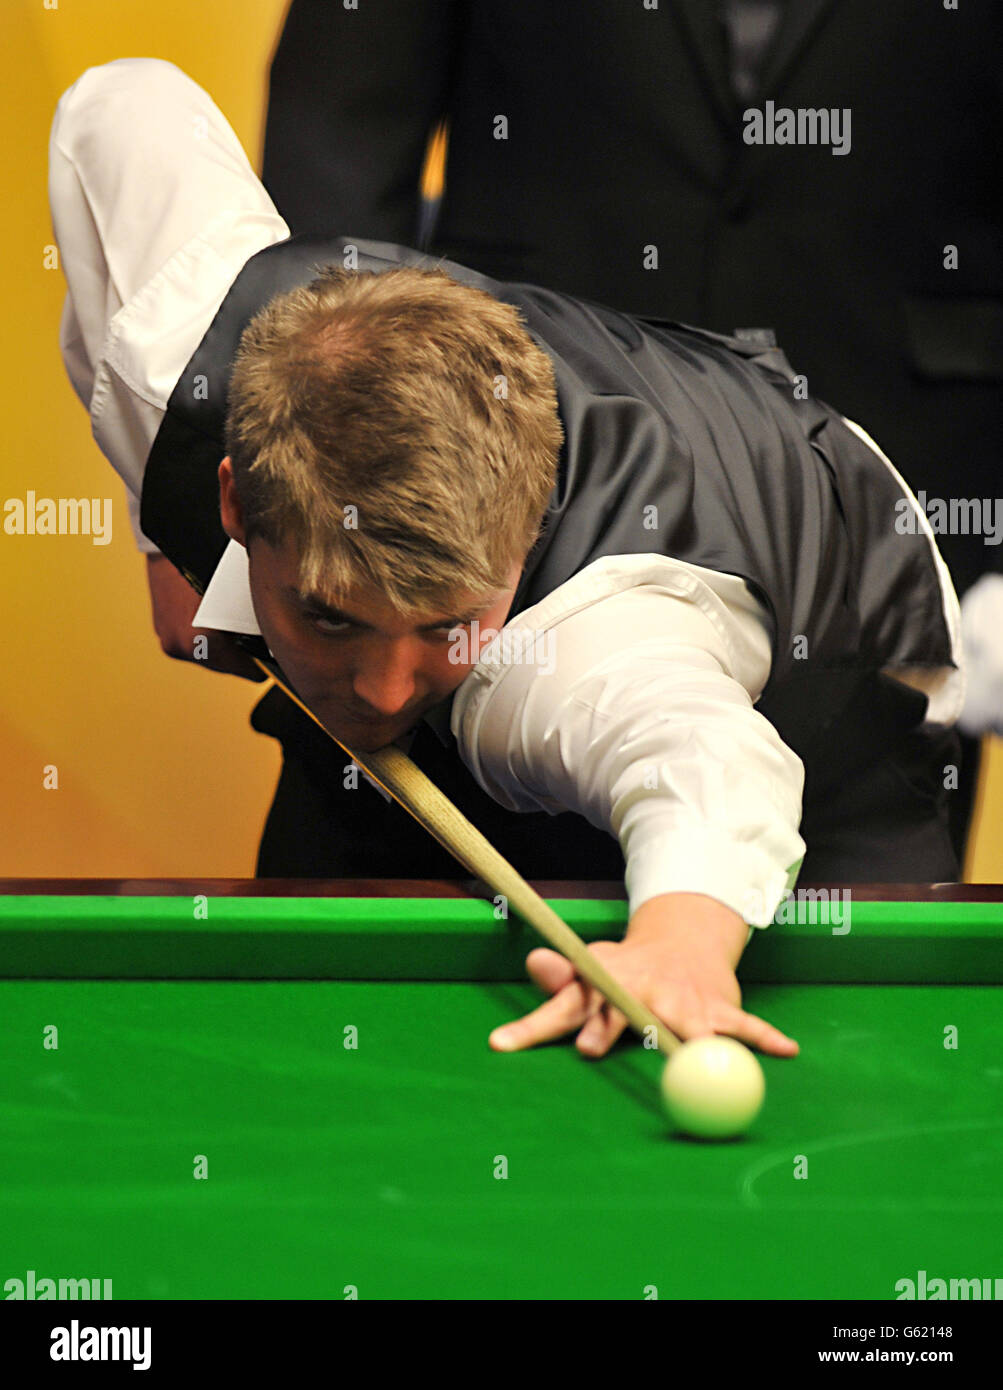 Michael White in action during his first round match against Mark Williams during the Betfair World Championships at the Crucible, Sheffield. Stock Photo